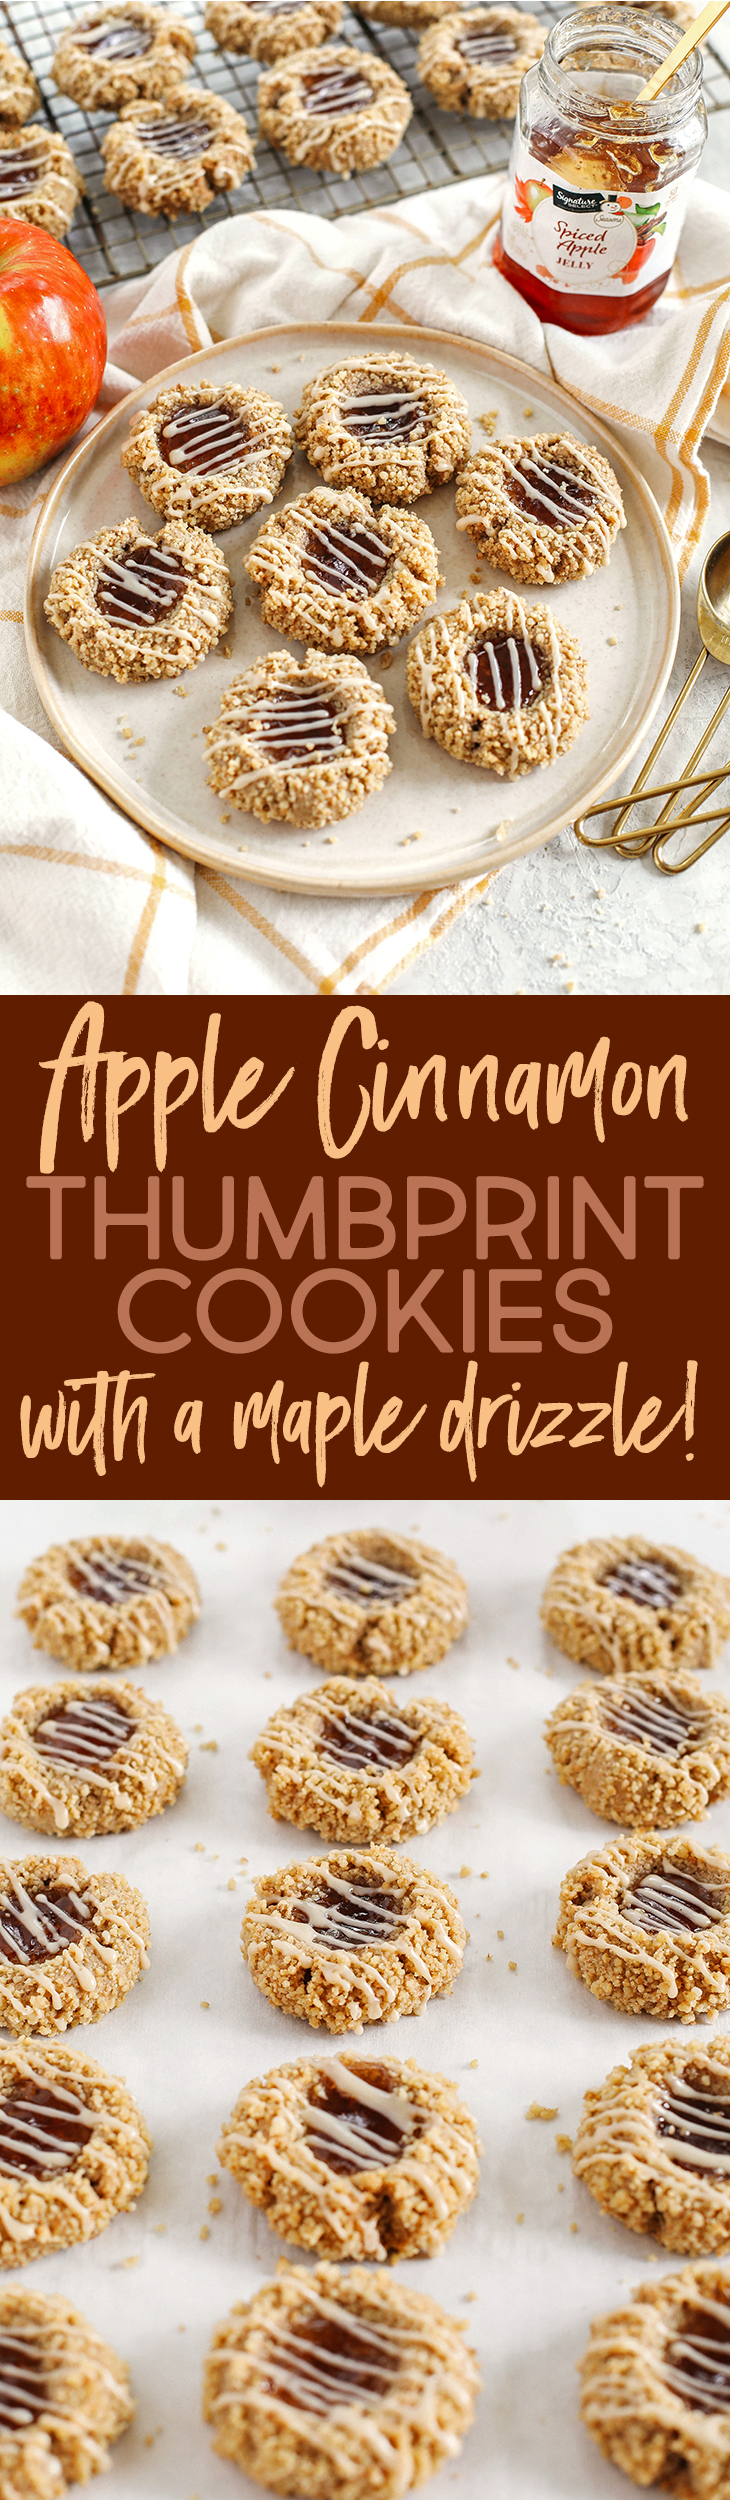 The most delicious gluten-free Apple Cinnamon Thumbprint Cookies that are soft and chewy, filled with spiced apple jelly and drizzled with maple icing for the perfect fall dessert!